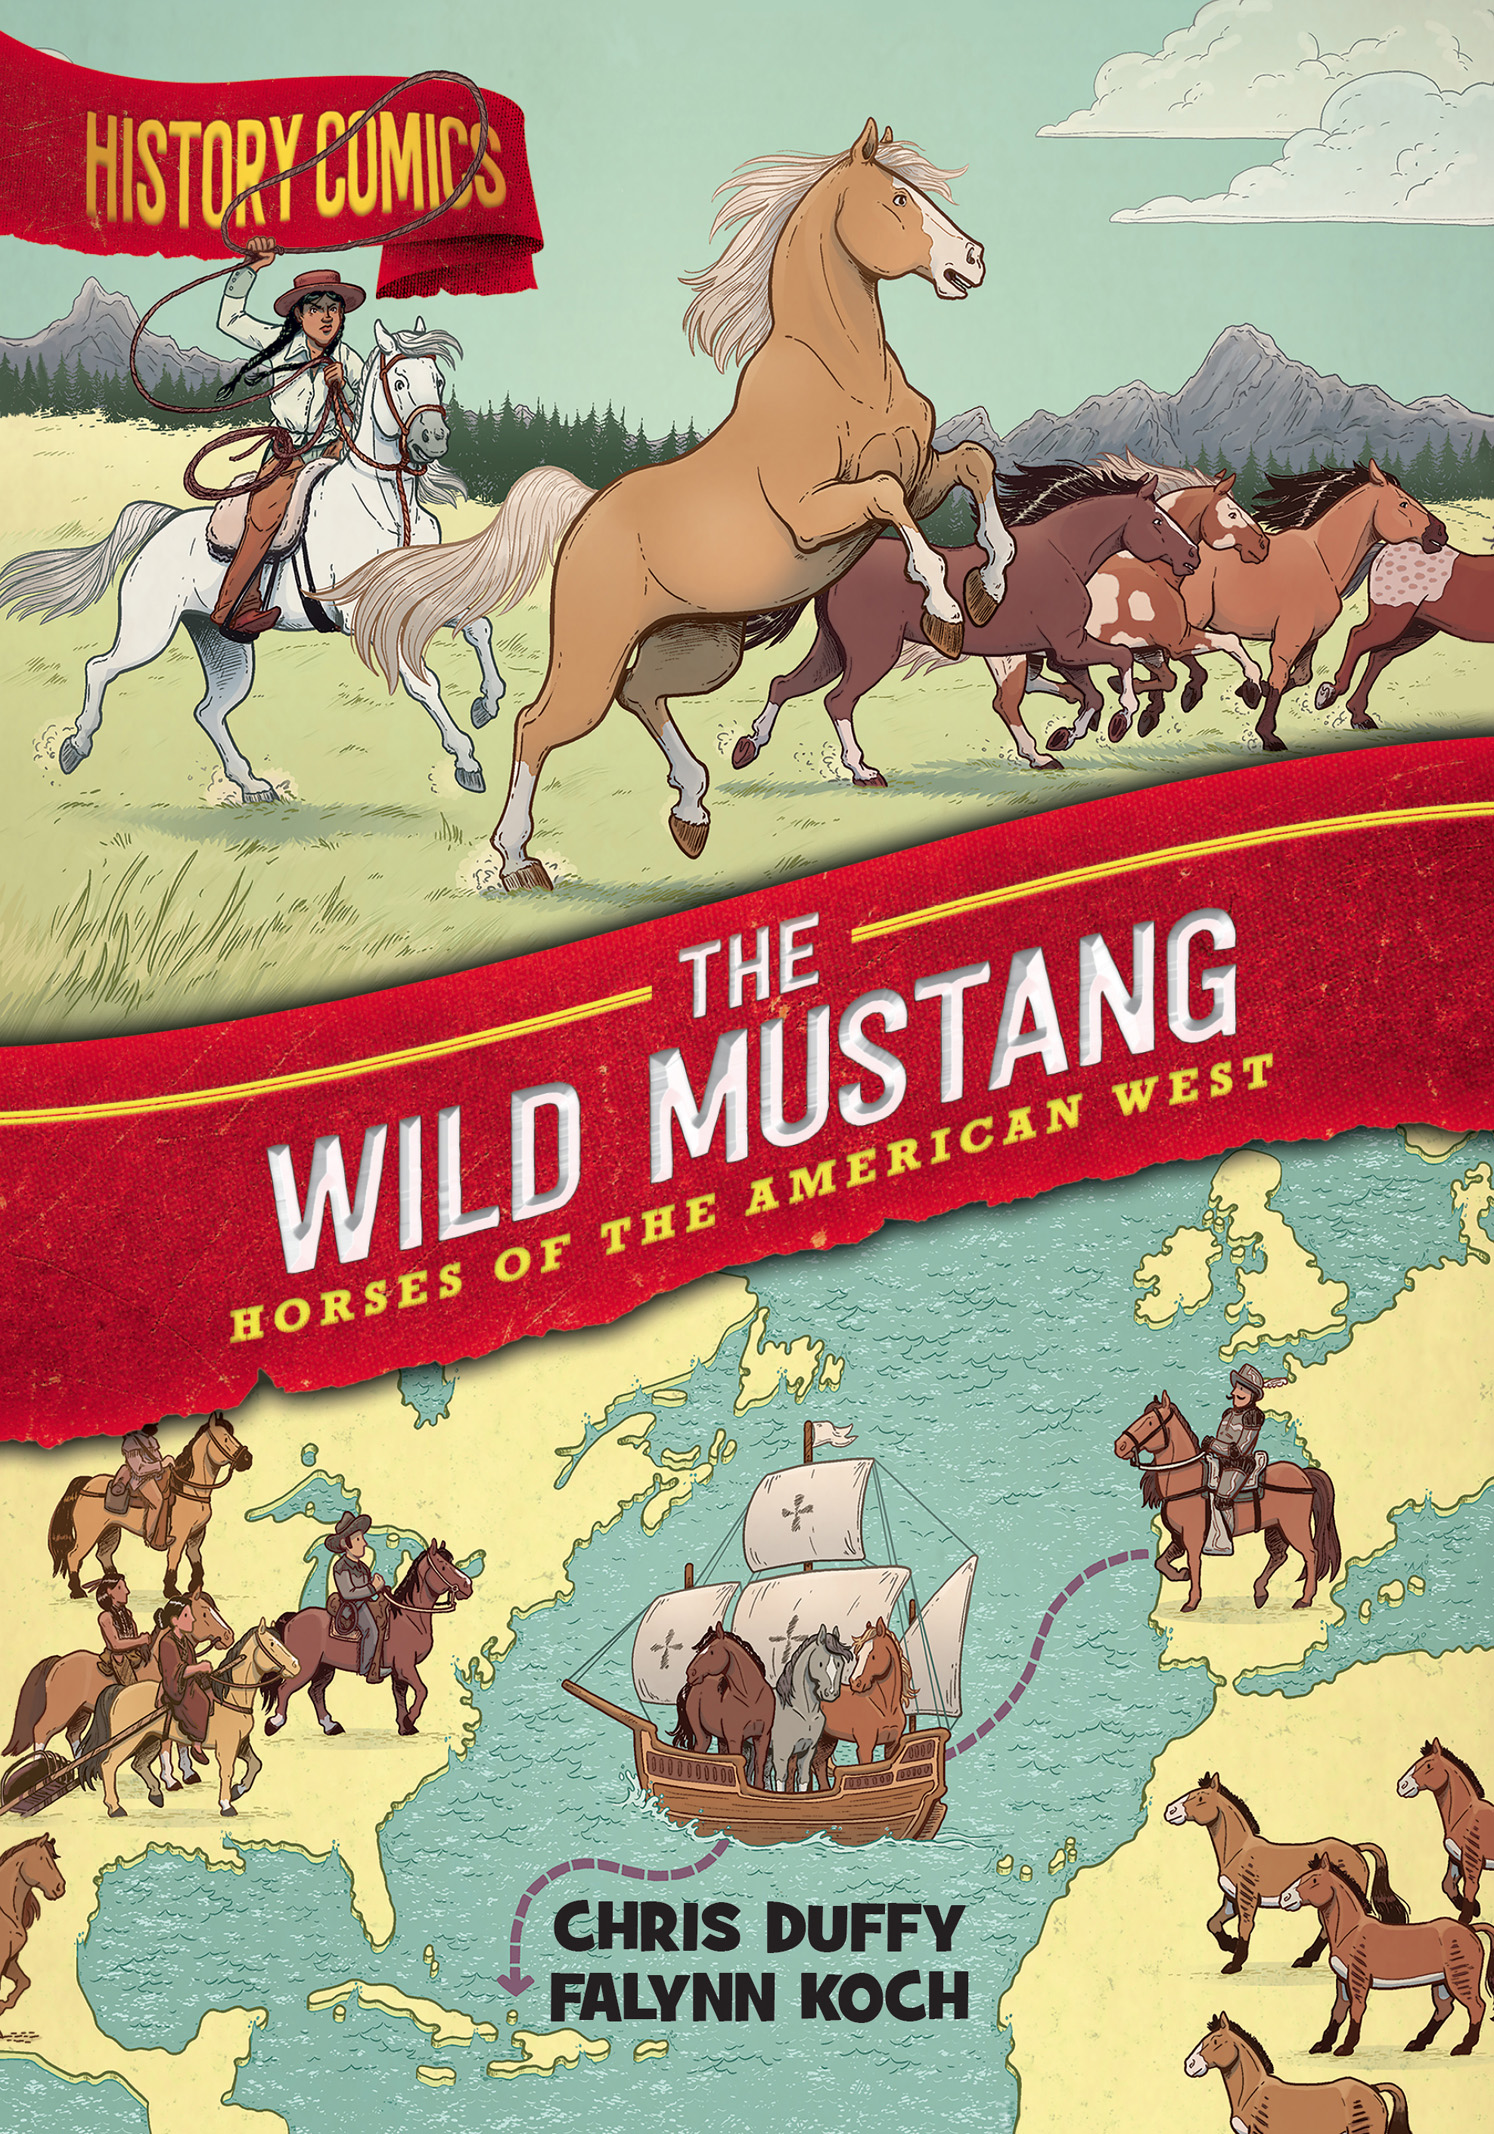 Read online History Comics comic -  Issue # The Wild Mustang - Horses of the American West - 1